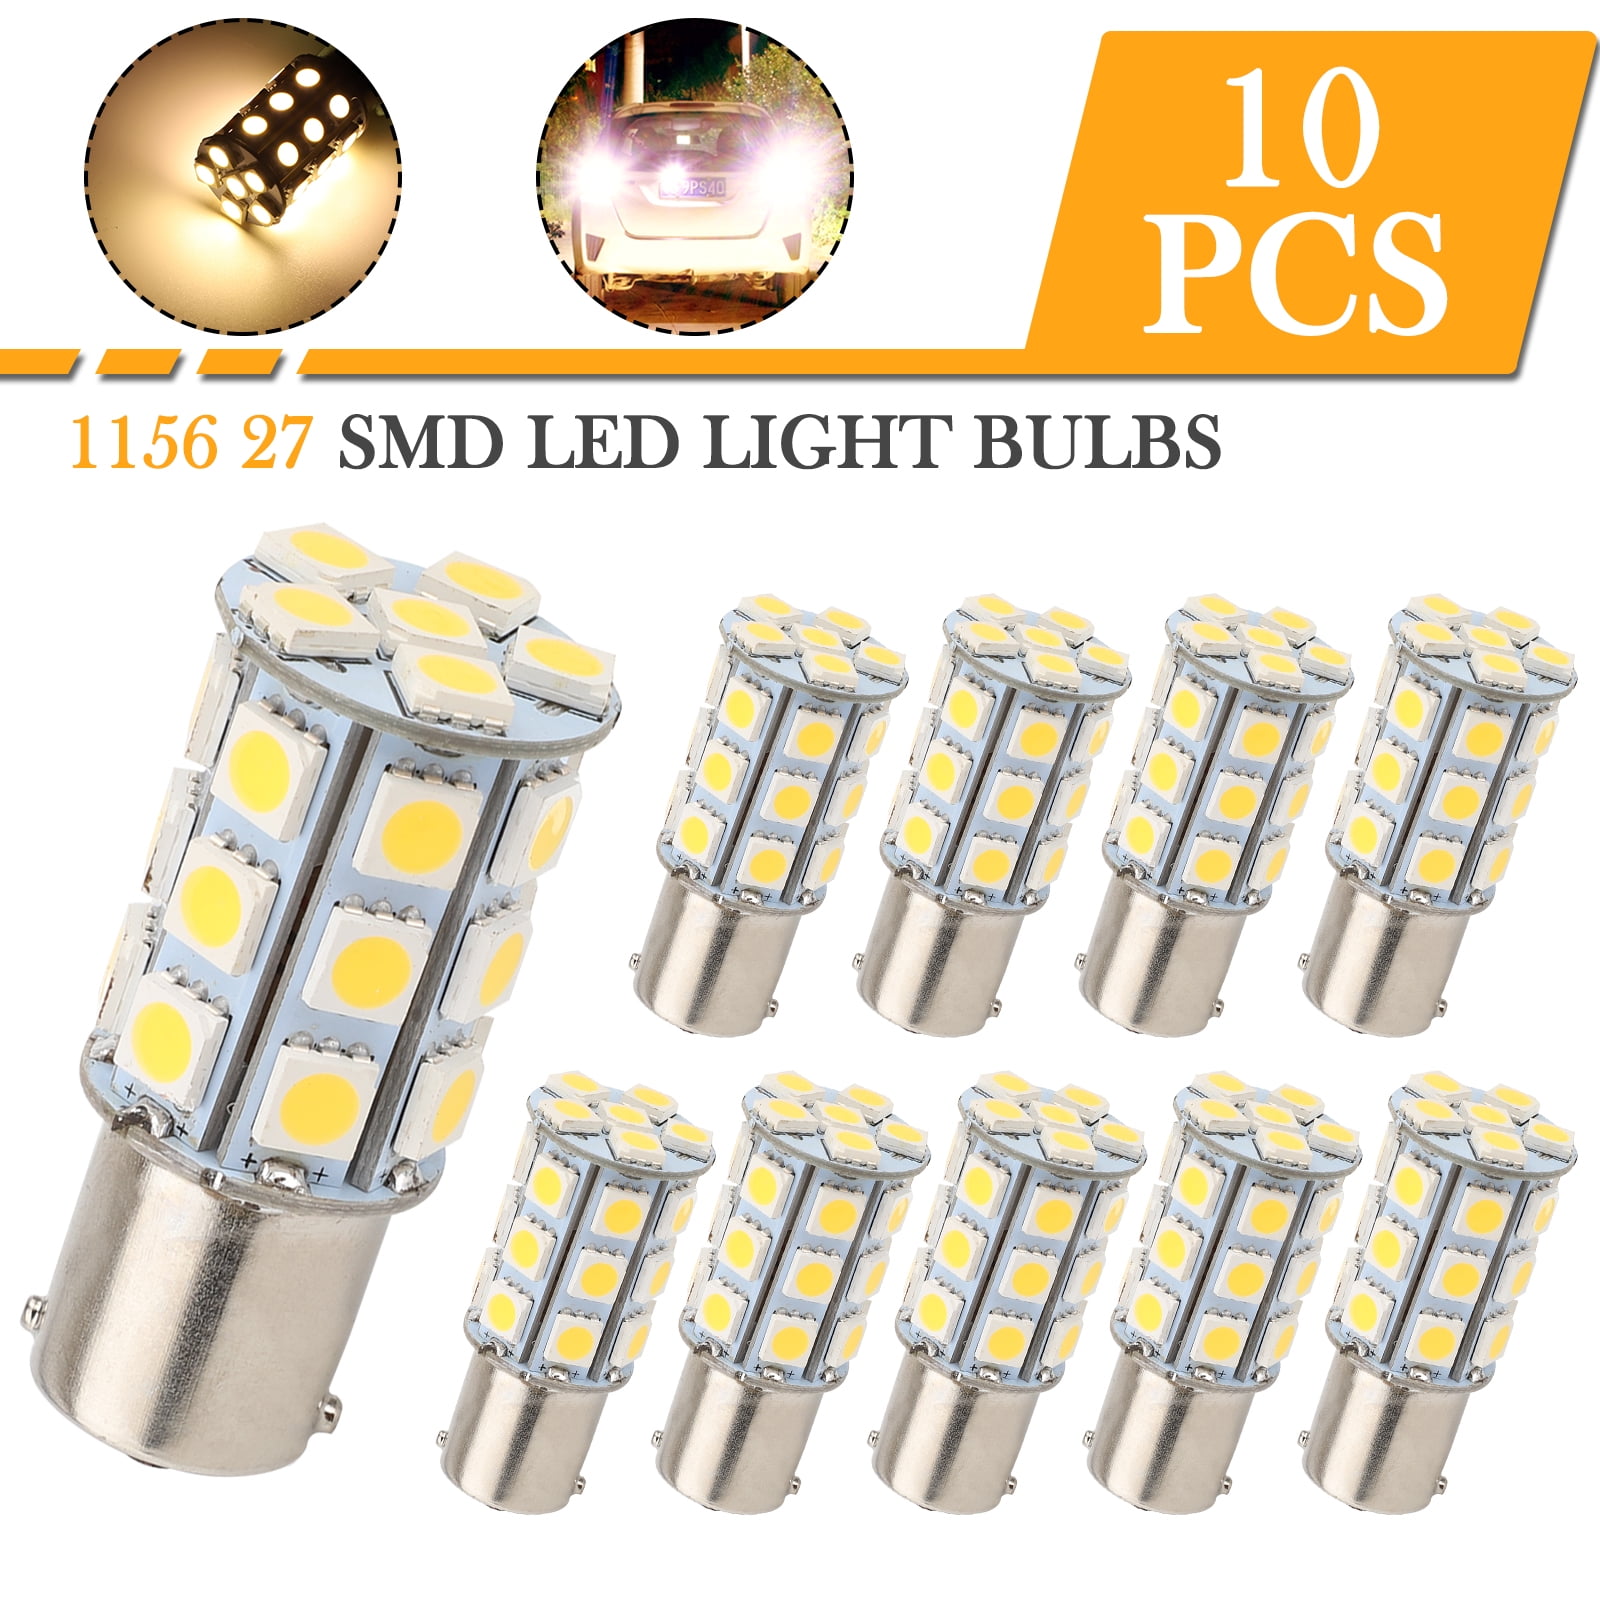 GRV Ba15s 1156 1141 LED Bulb 24-5050SMD Super Bright Camper RV Interior Led Replacement Bulbs DC 12V Warm White Pack of 10 